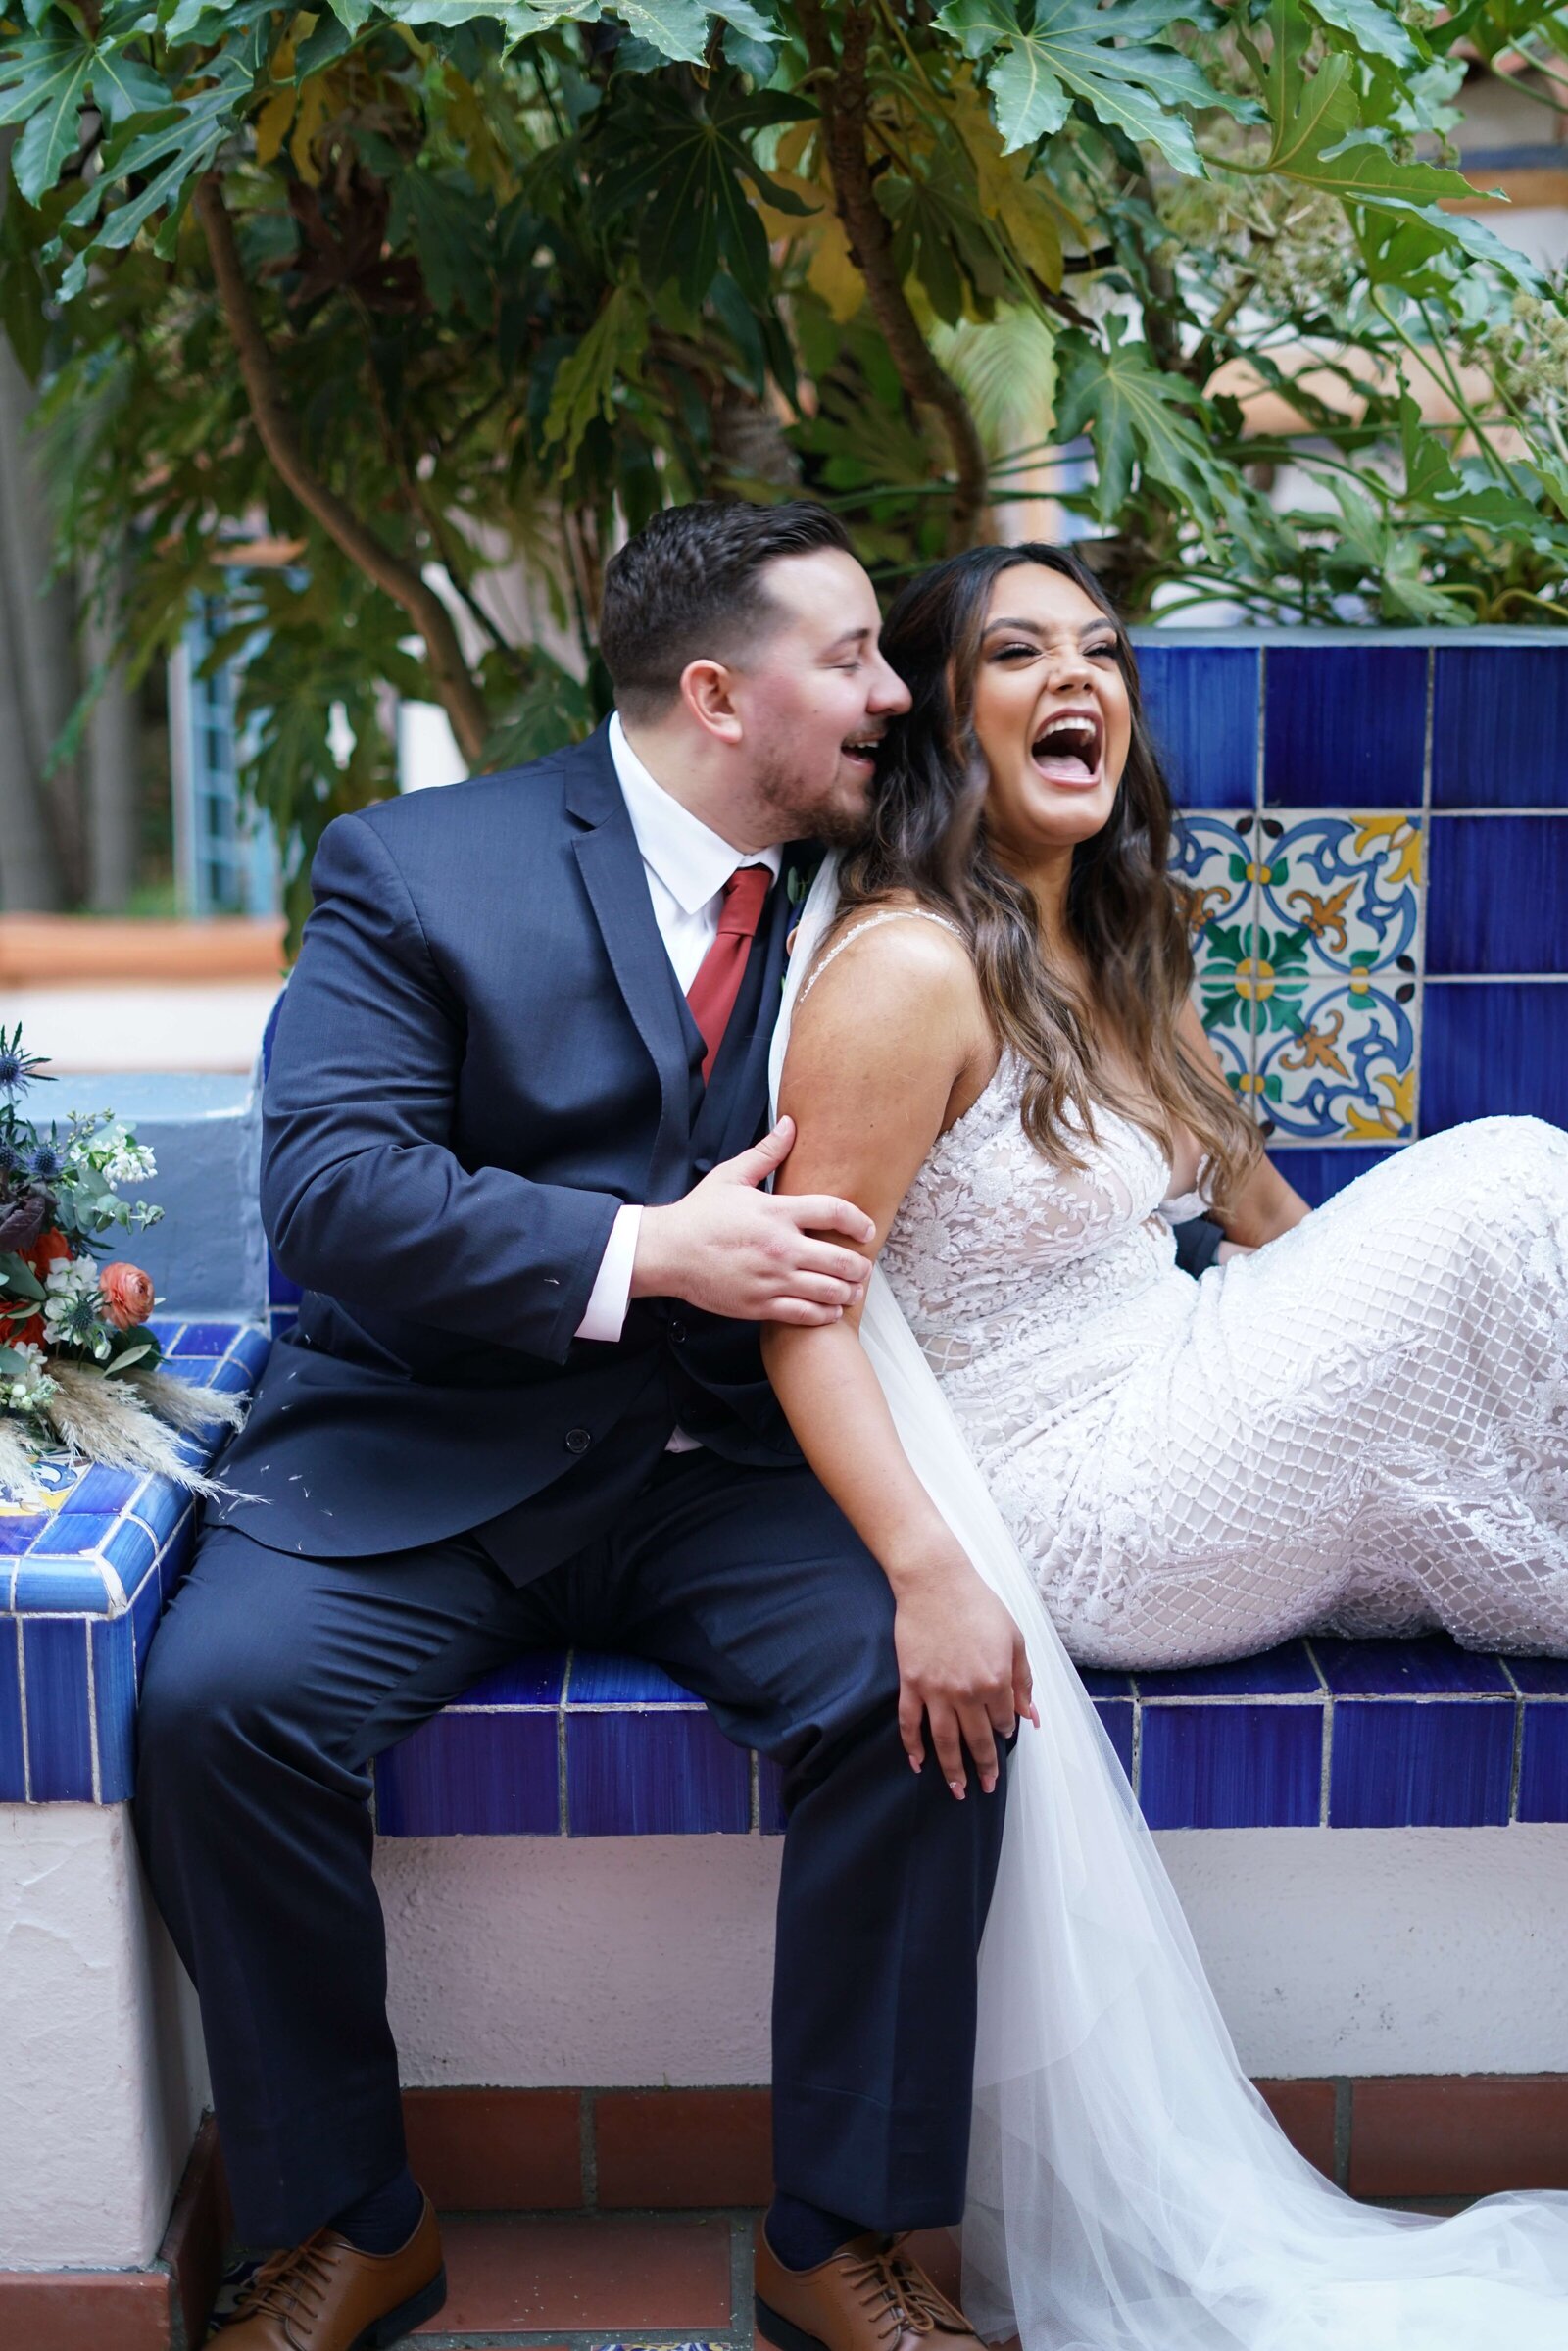 Newport Beach Wedding Photographer couple laughing together on tiled bench